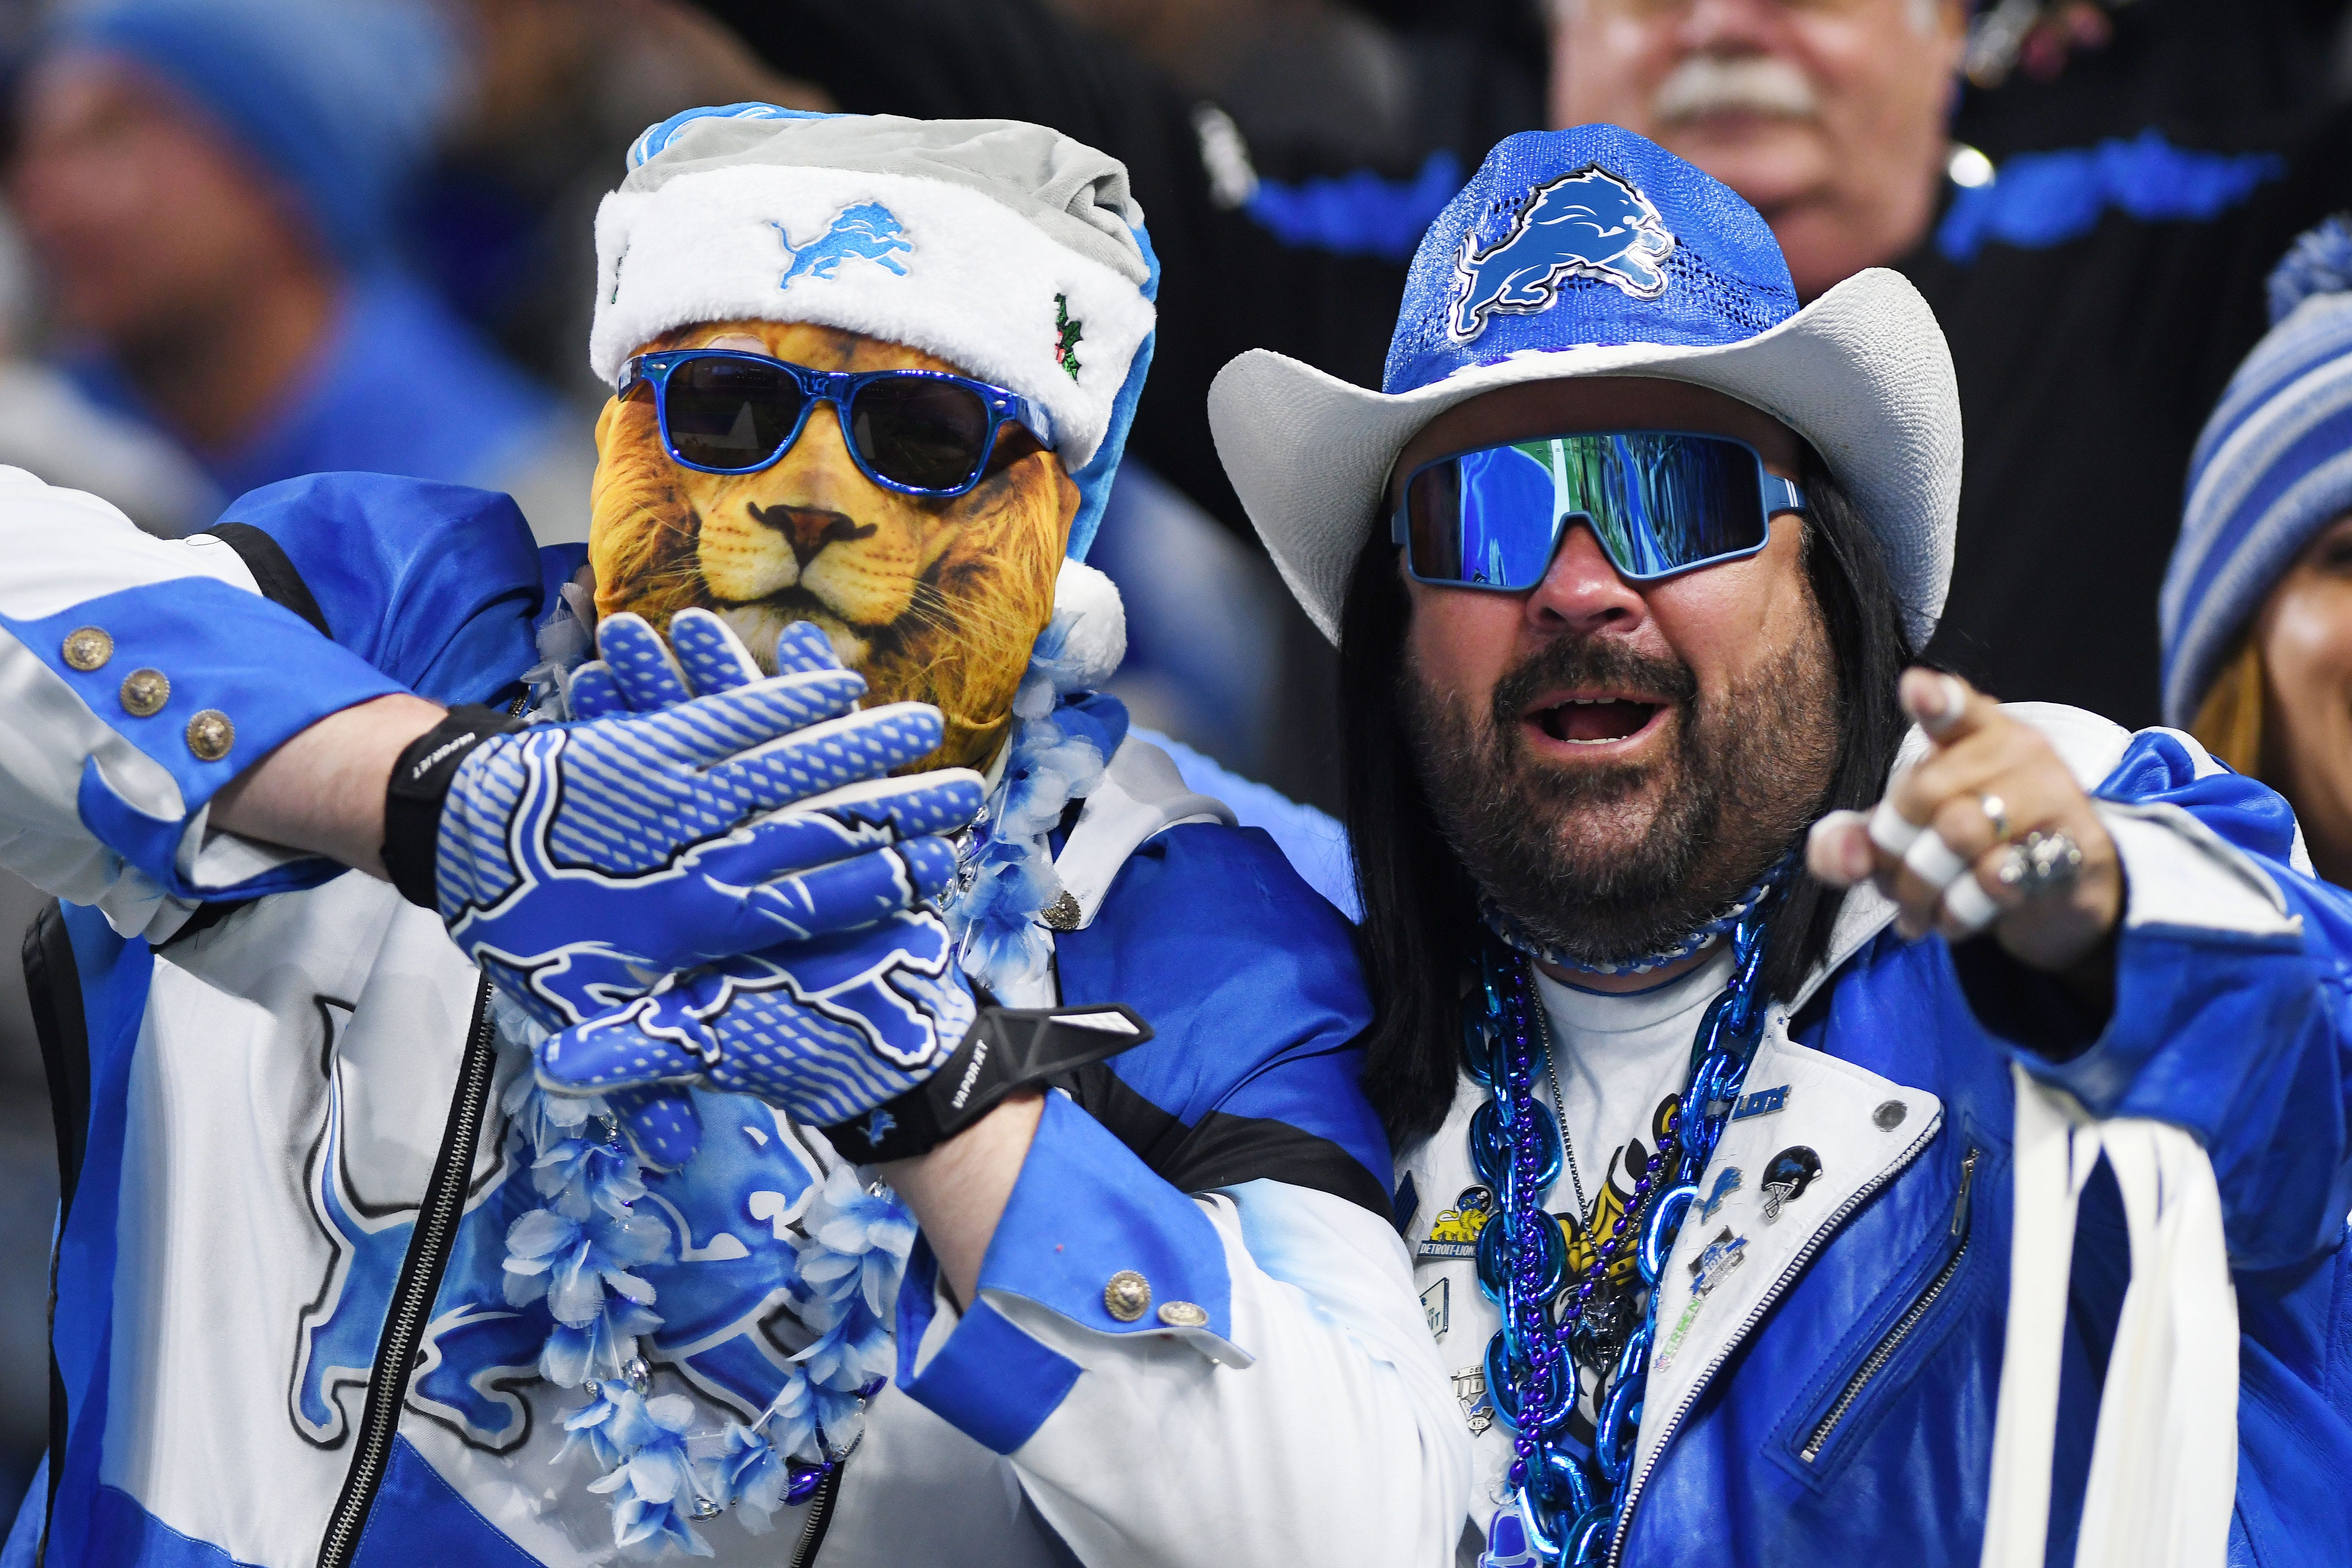 Faithful Lions fans, in full outfits, cheer on the team as they get their first victory of the year.